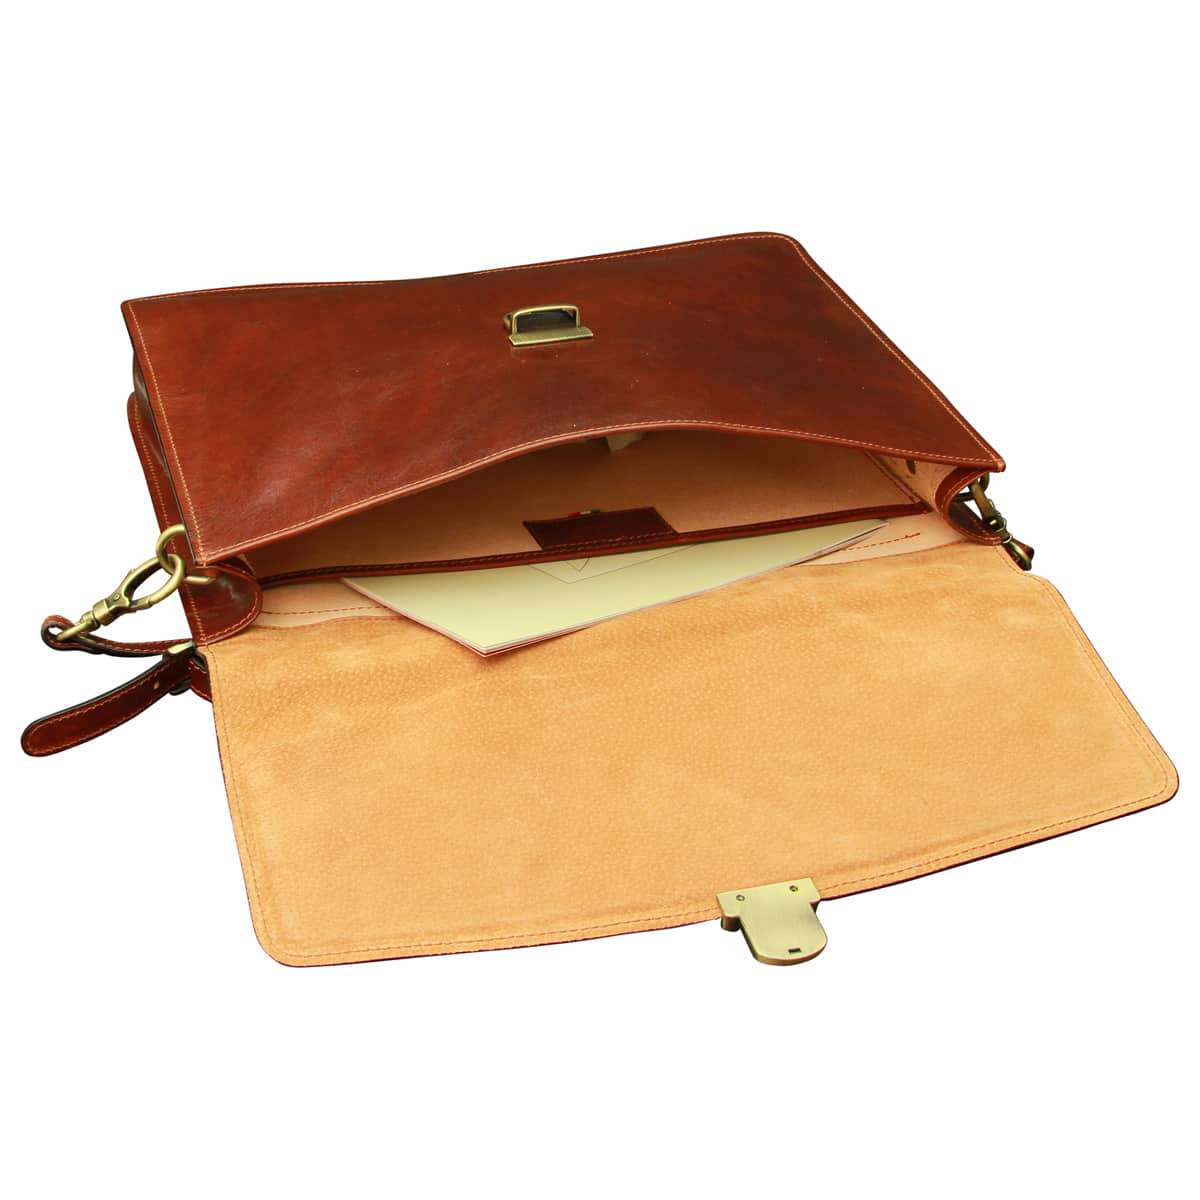 Business Briefcase - Brown | 407505MA UK | Old Angler Firenze